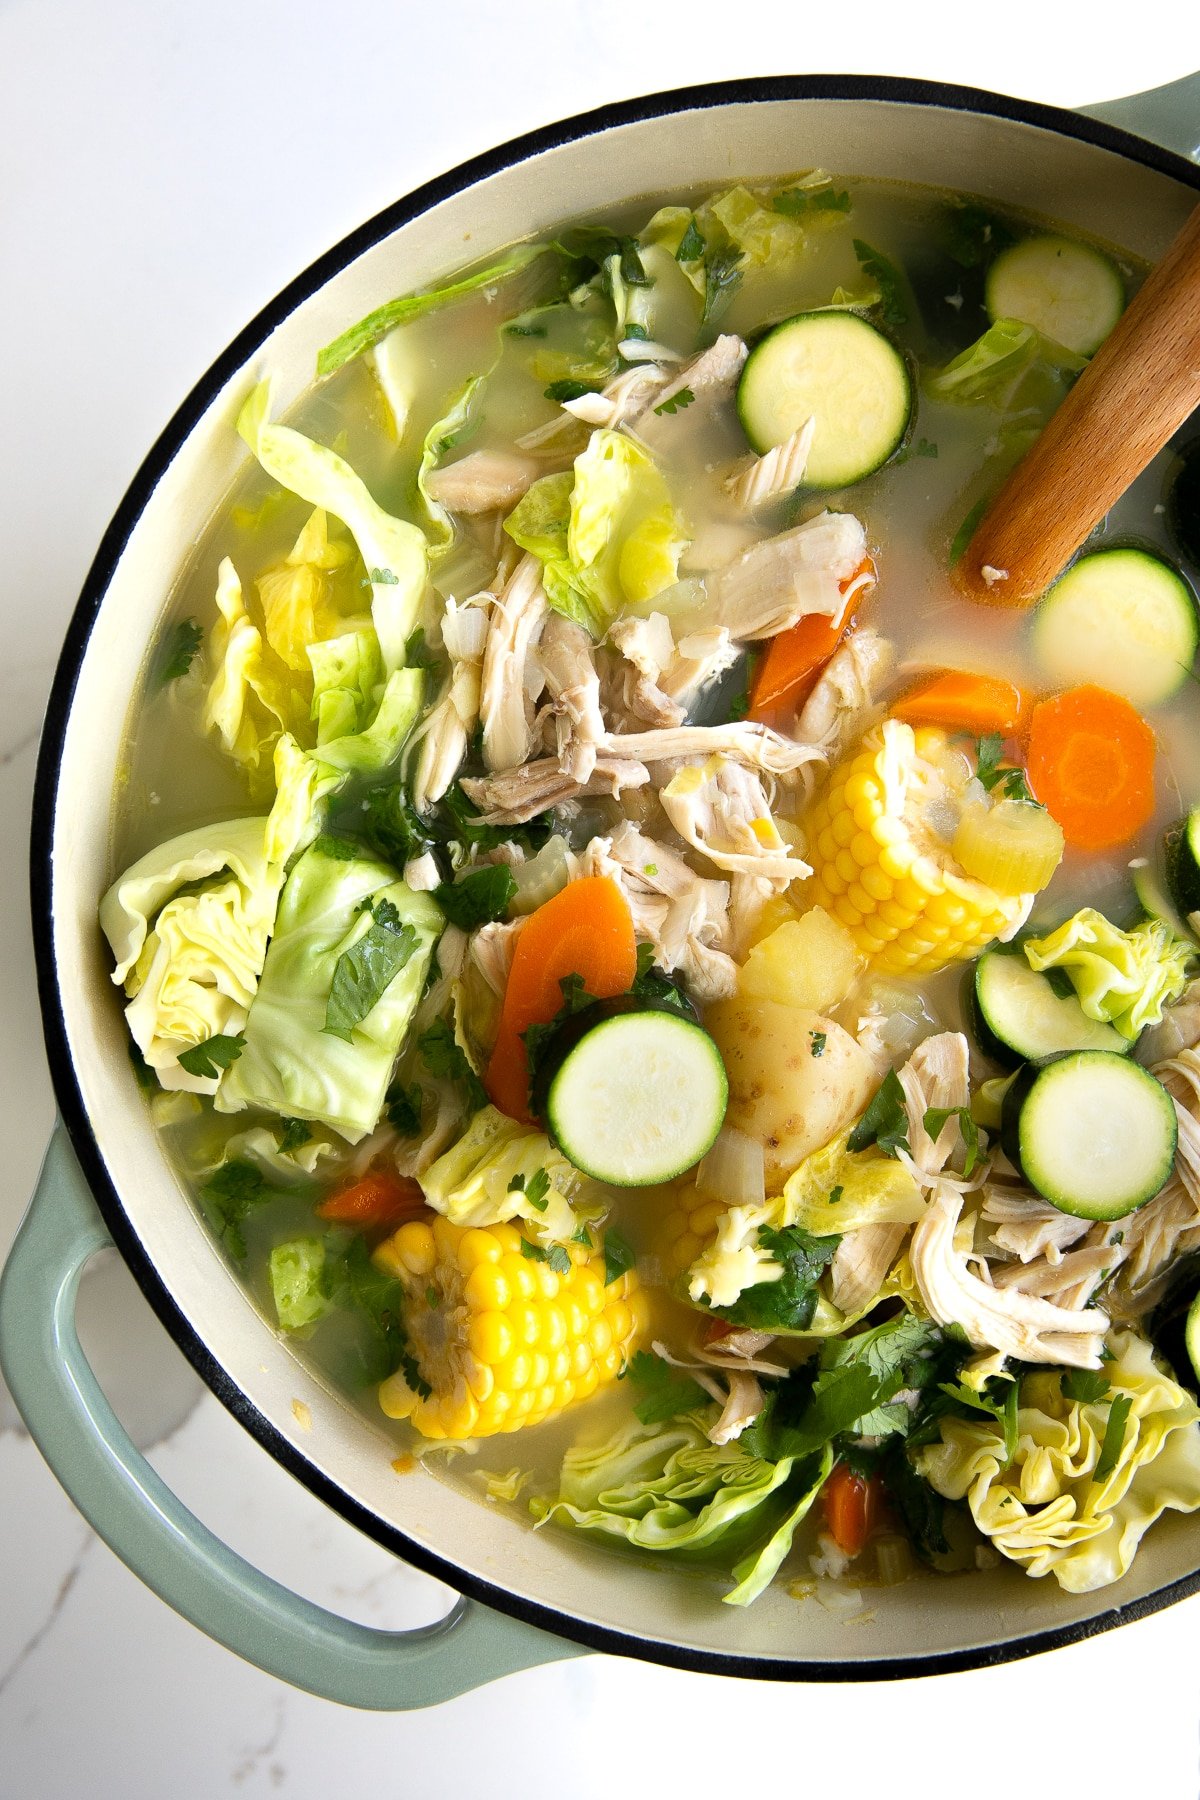 Large pot of soup filled with a clear chicken broth, zucchini, carrots, corn, shredded chicken, cabbage and potatoes.